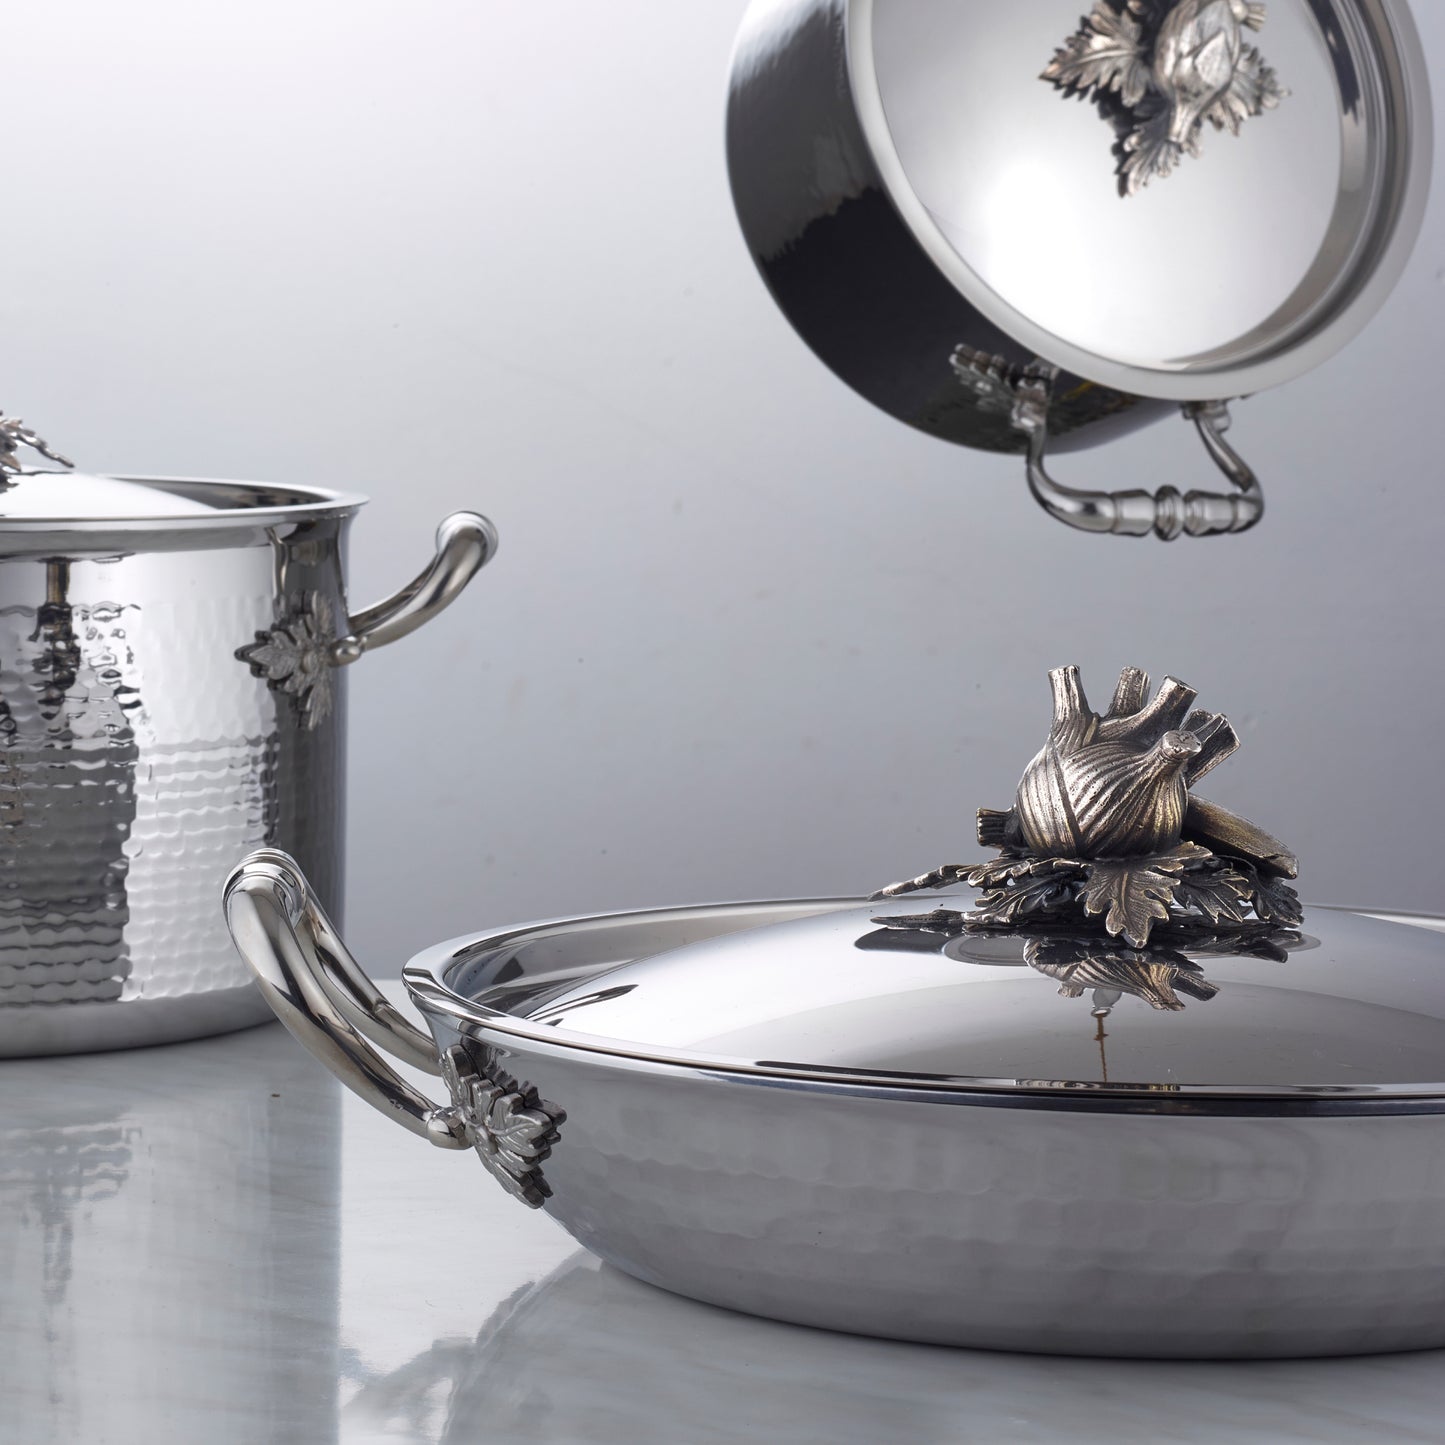 Opus Prima hammered clad stainless steel gratin with decorated silver-plated lid knob finial from Ruffon